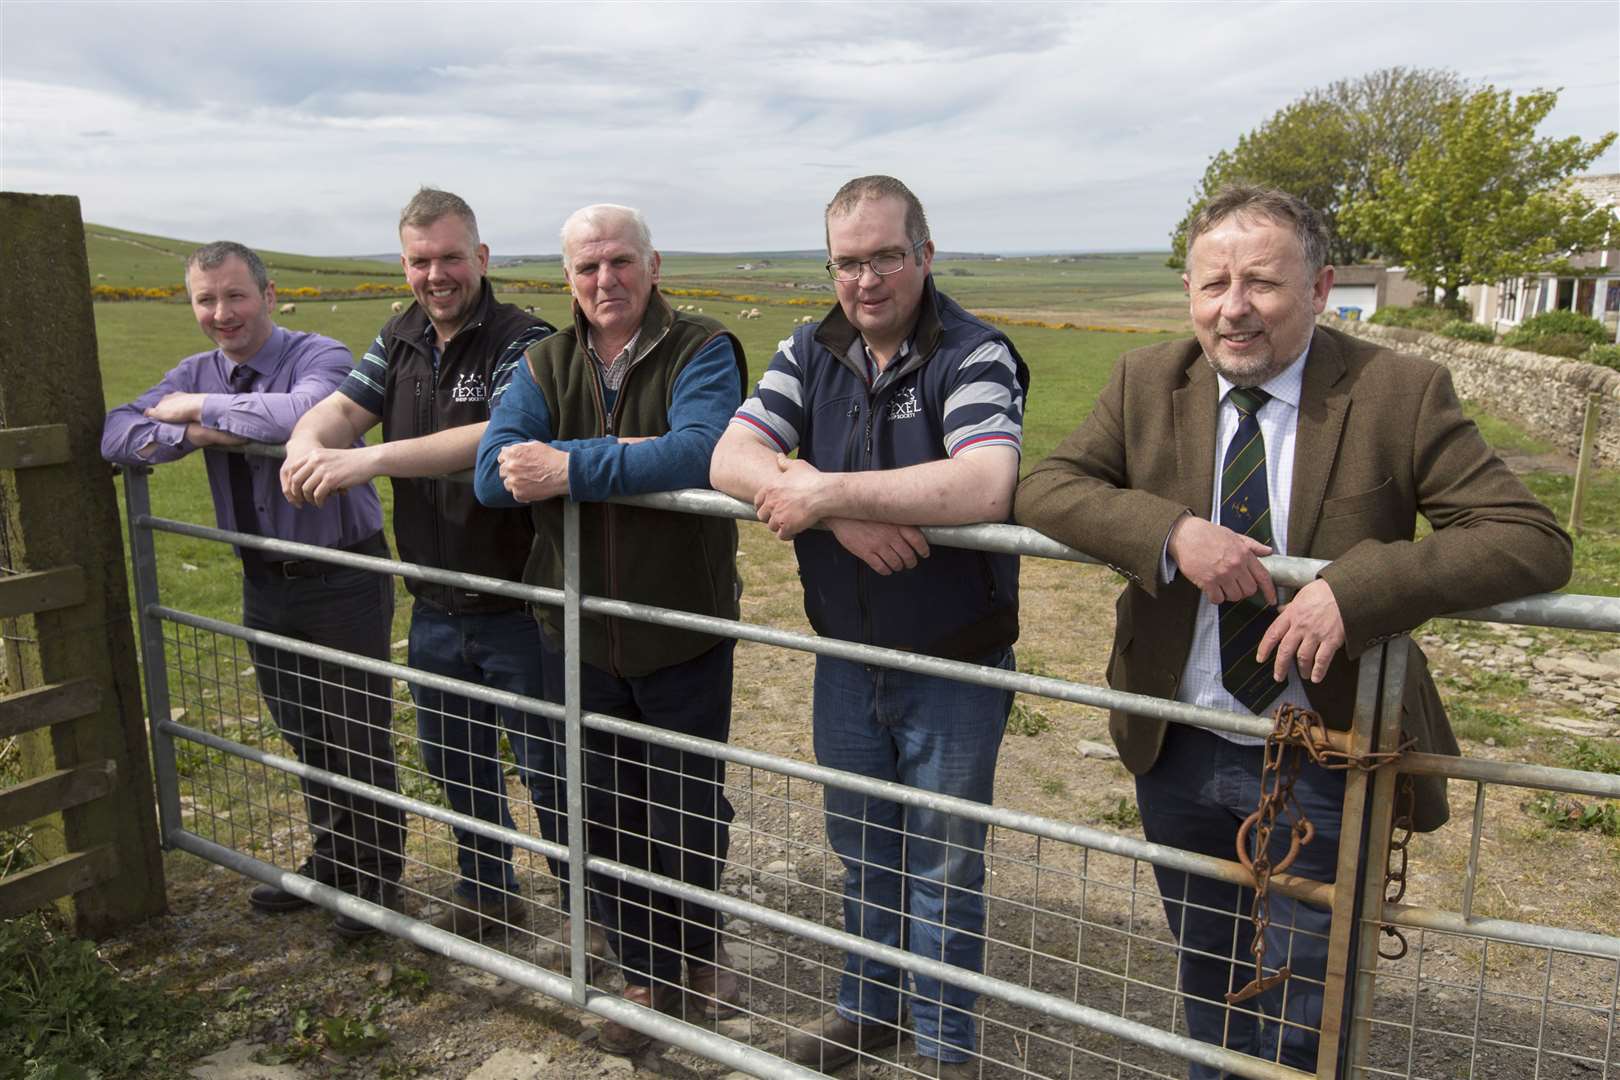 Kenneth Sutherland (centre), with his sons, Kenneth jnr (centre, left) and Stephen (centre, right), along with NSA Highland Sheep event chairman Willie Budge (left) and organiser Euan Emslie. Picture: Robert MacDonald / Northern Studios